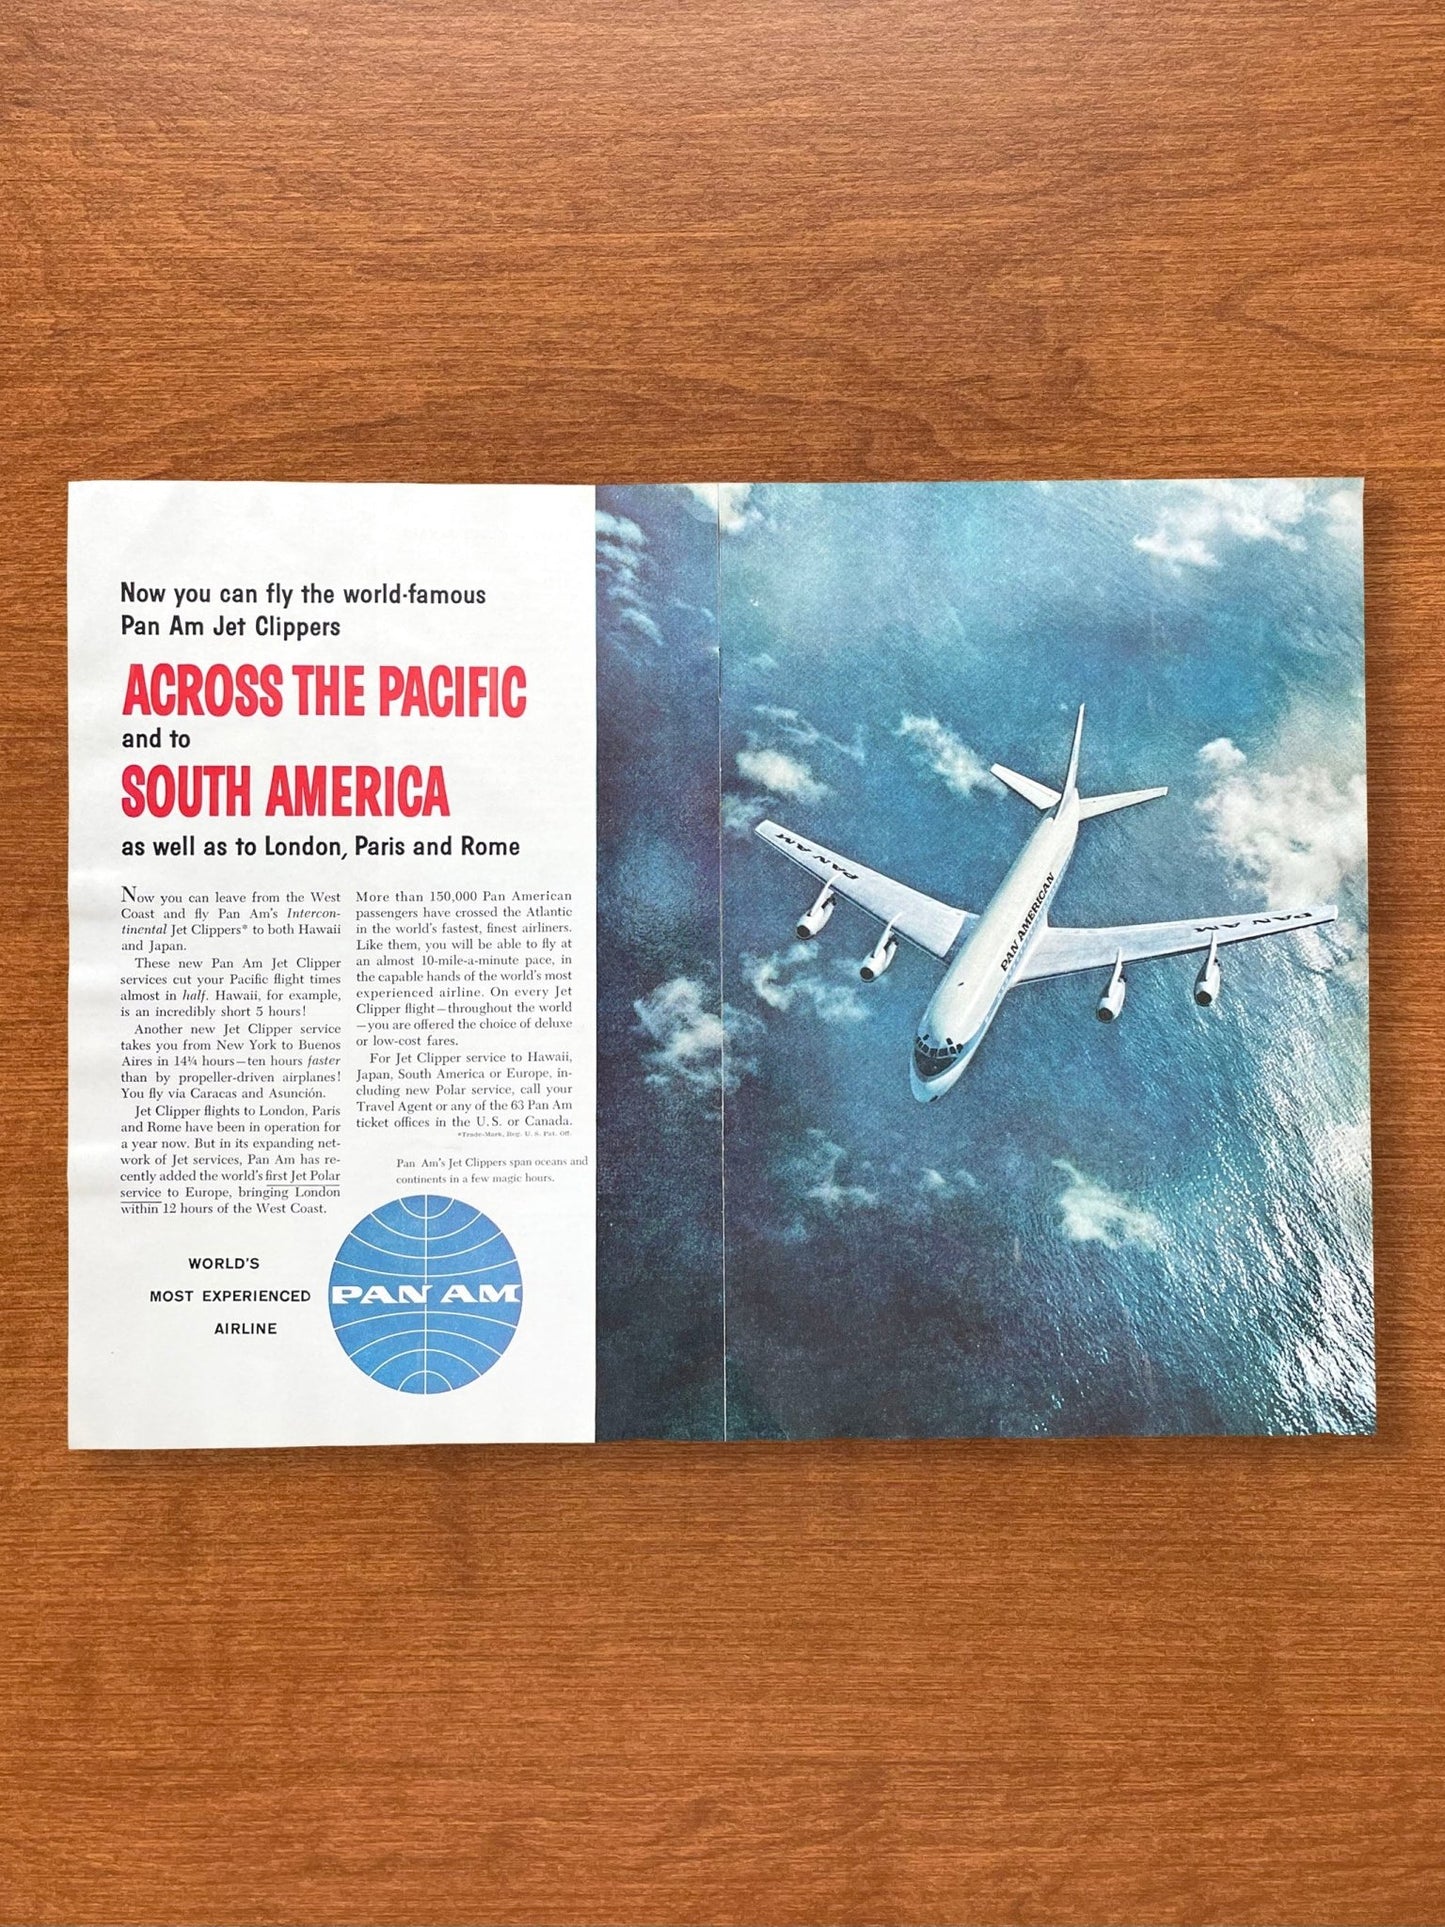 1959 Pan Am "Across the Pacitic... South America" Advertisement